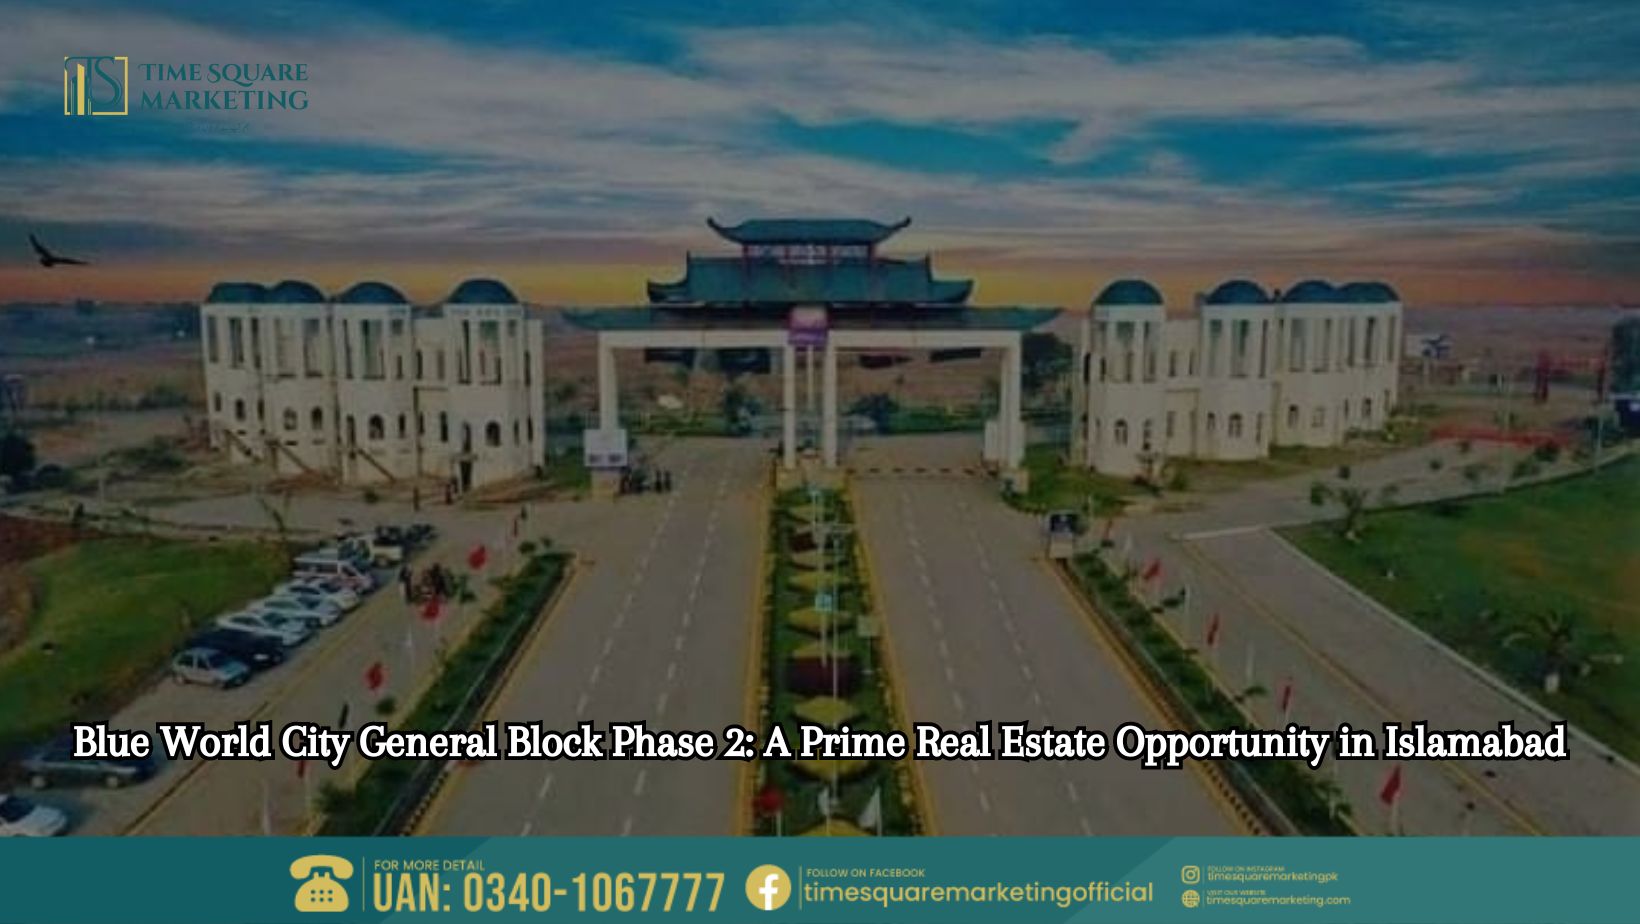 Blue World City General Block Phase 2 A Prime Real Estate Opportunity in Islamabad